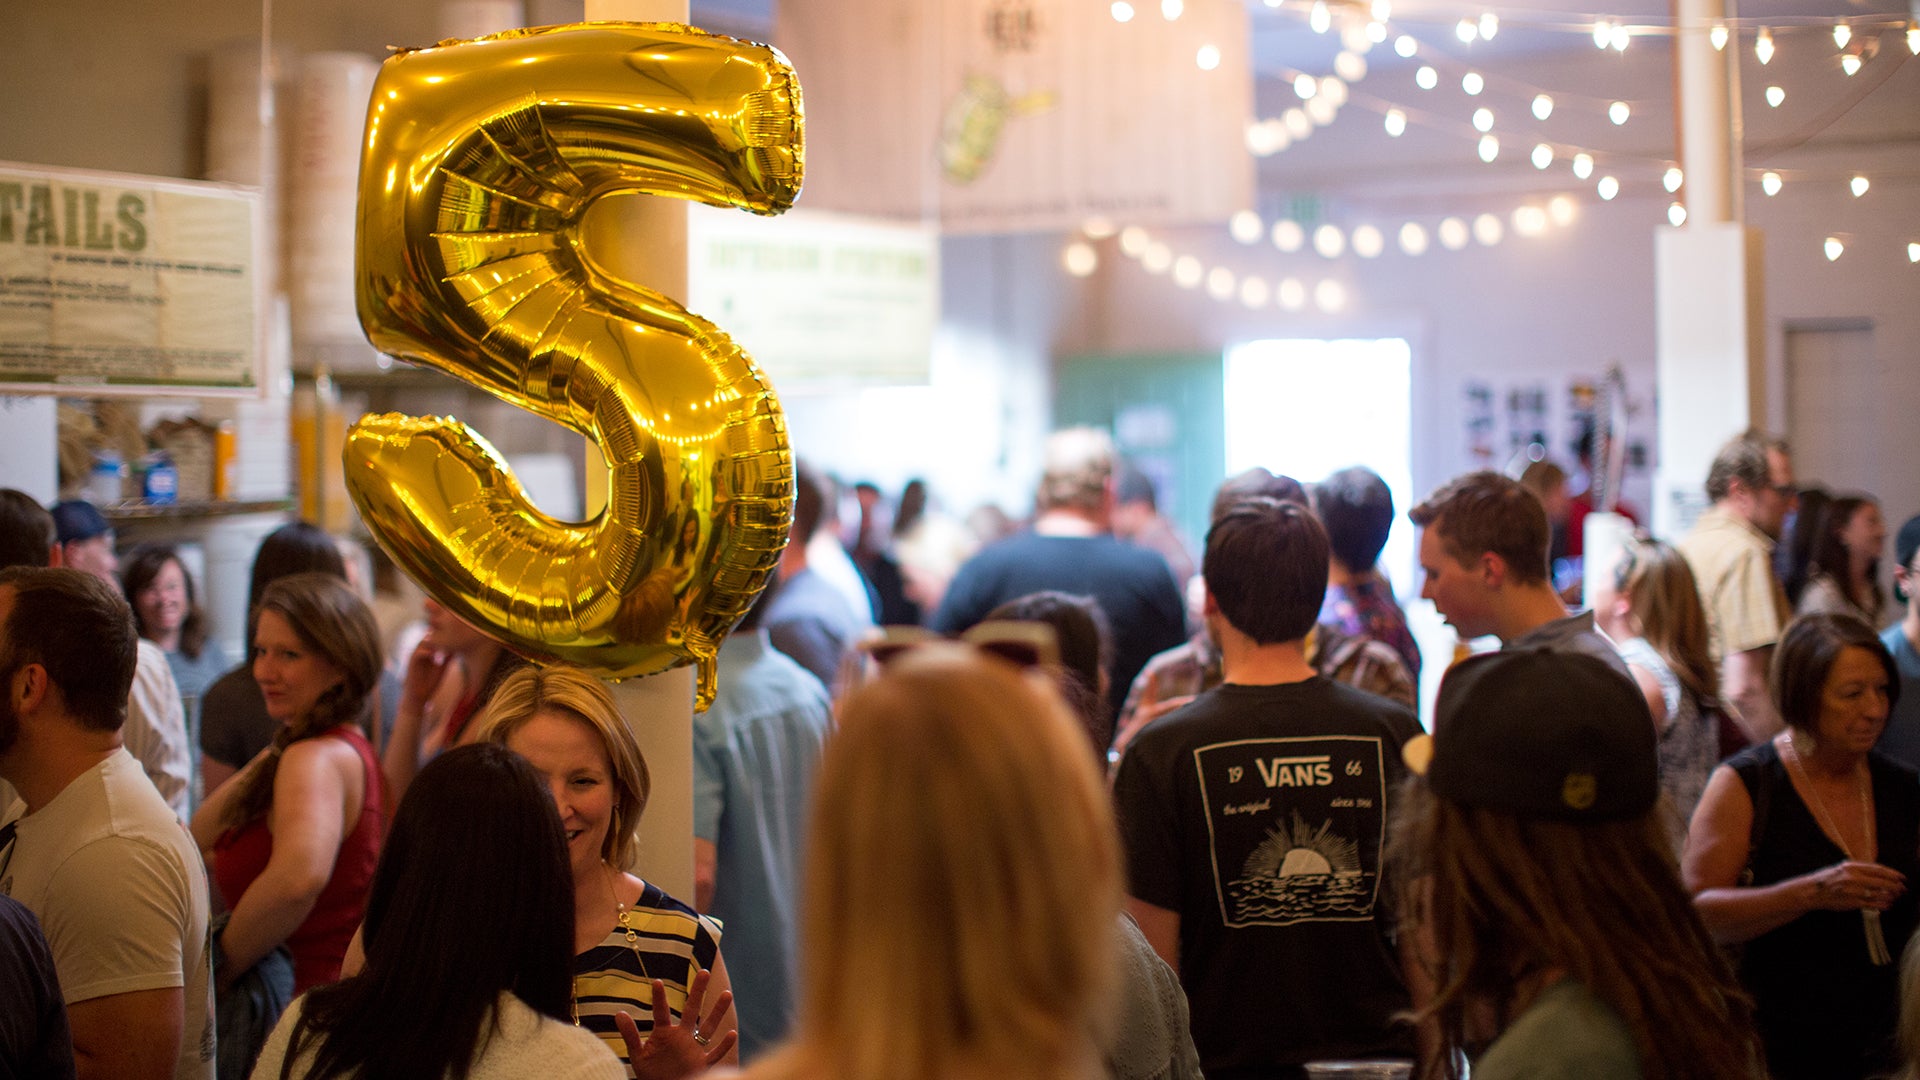 The Real Dill's 5 Year Anniversary Party Recap